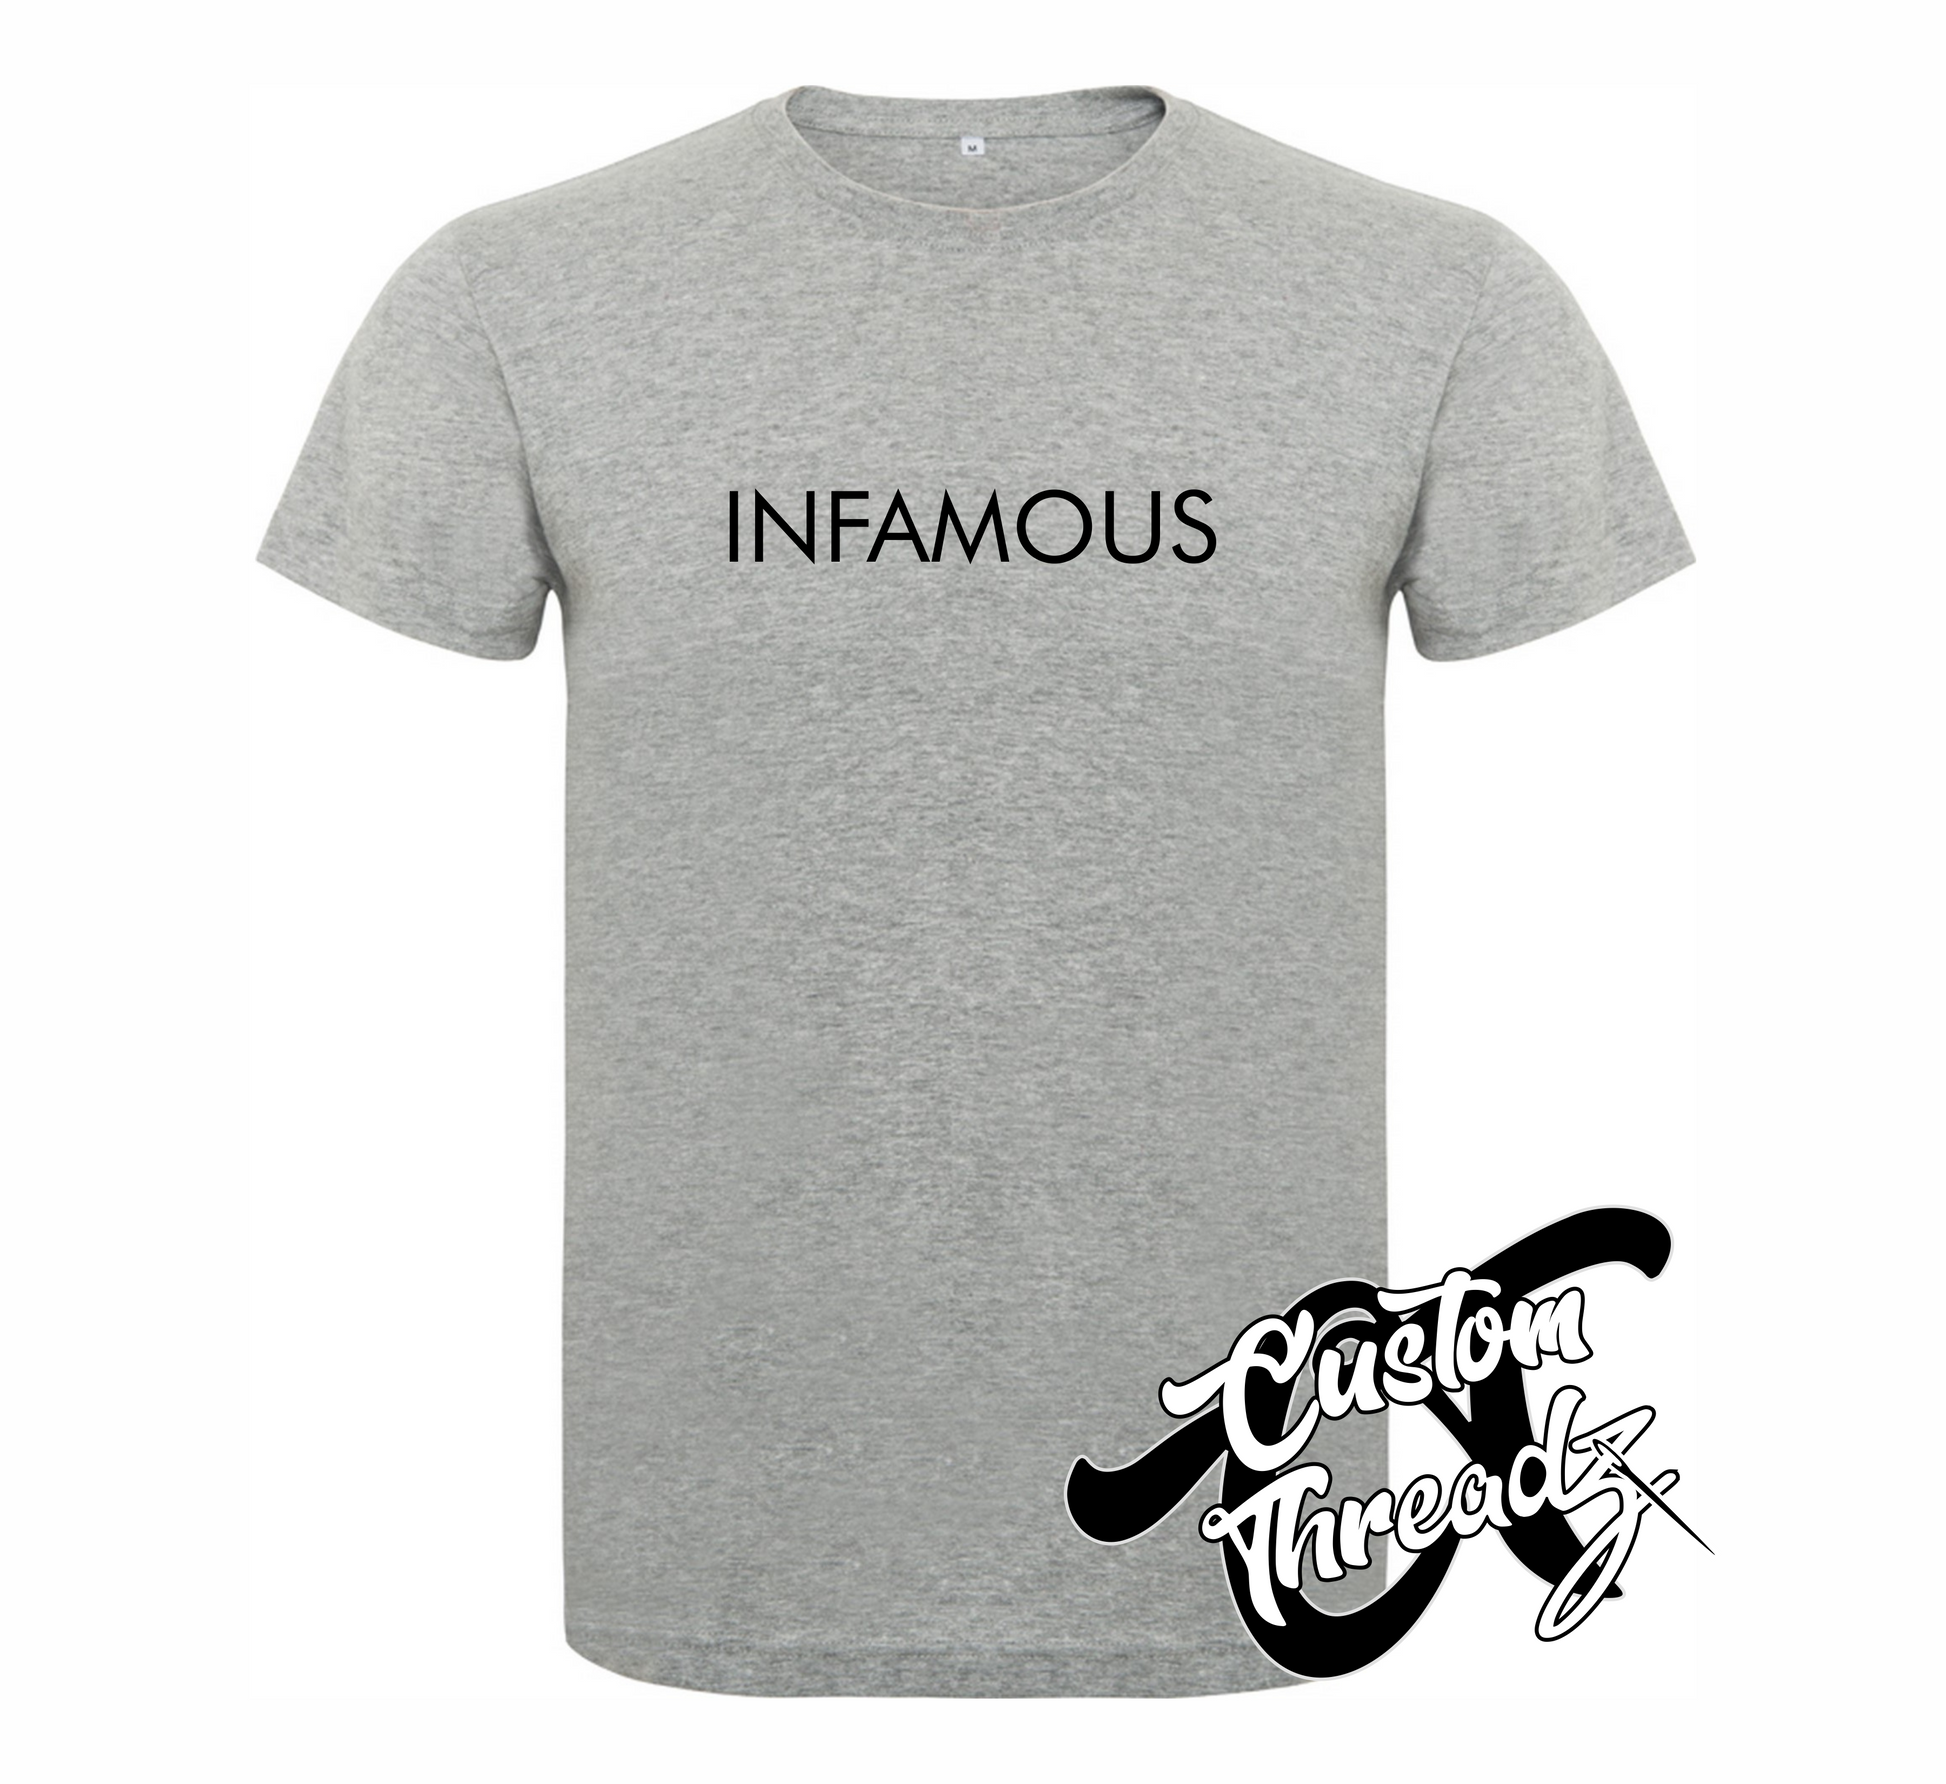 athletic heather grey tee with infamous the infamous collection DTG printed design